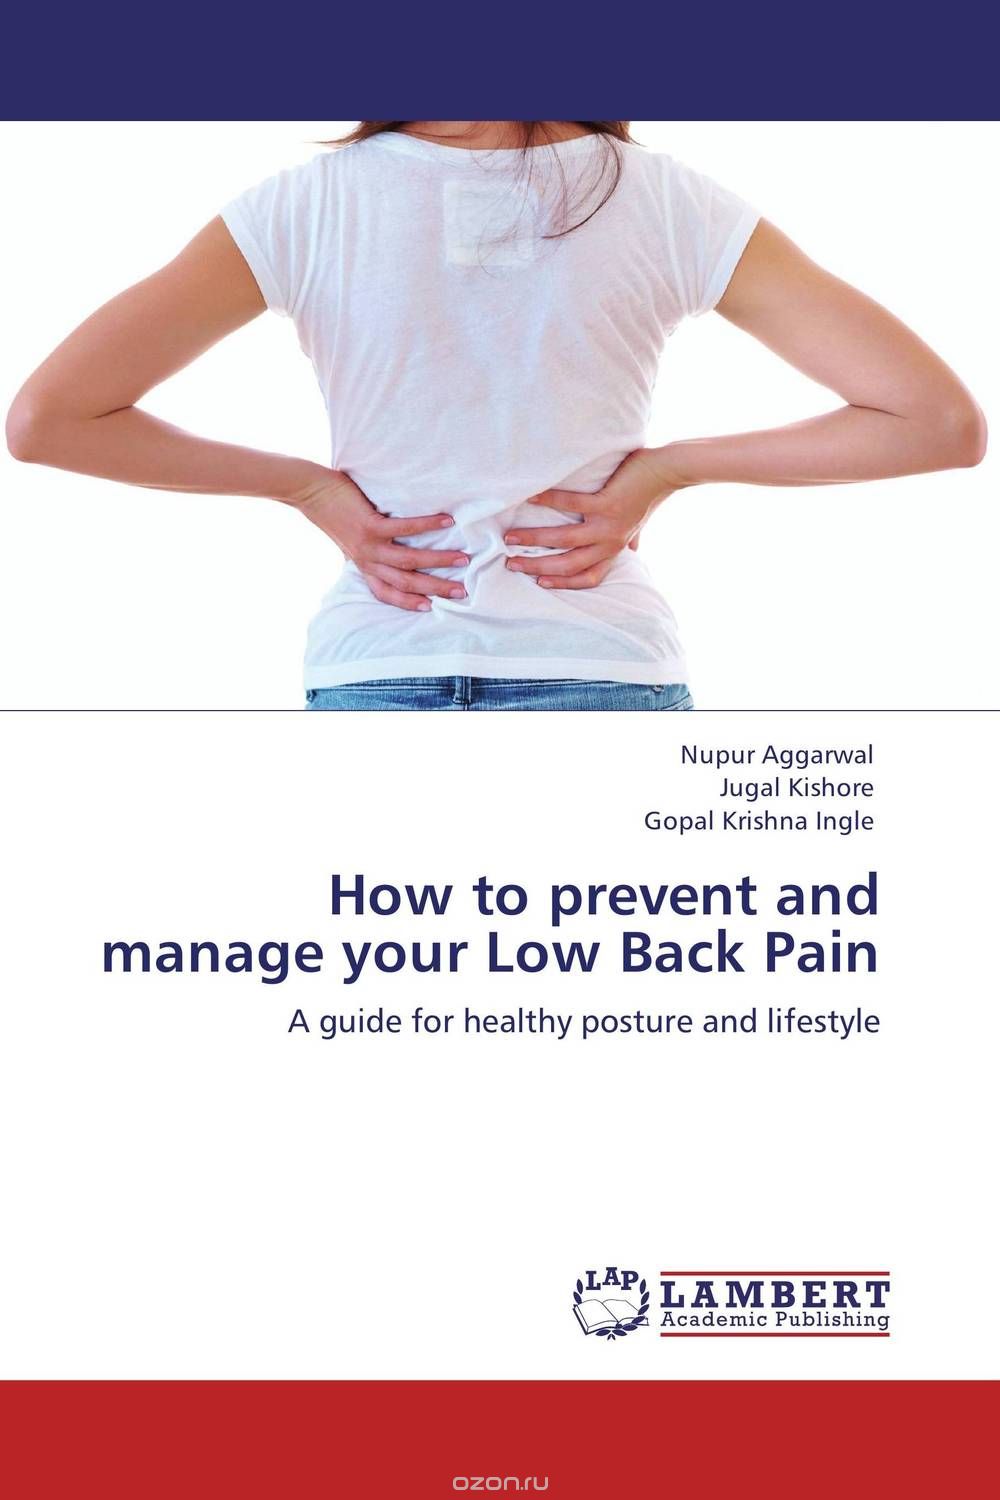 Скачать книгу "How to prevent and manage your Low Back Pain"